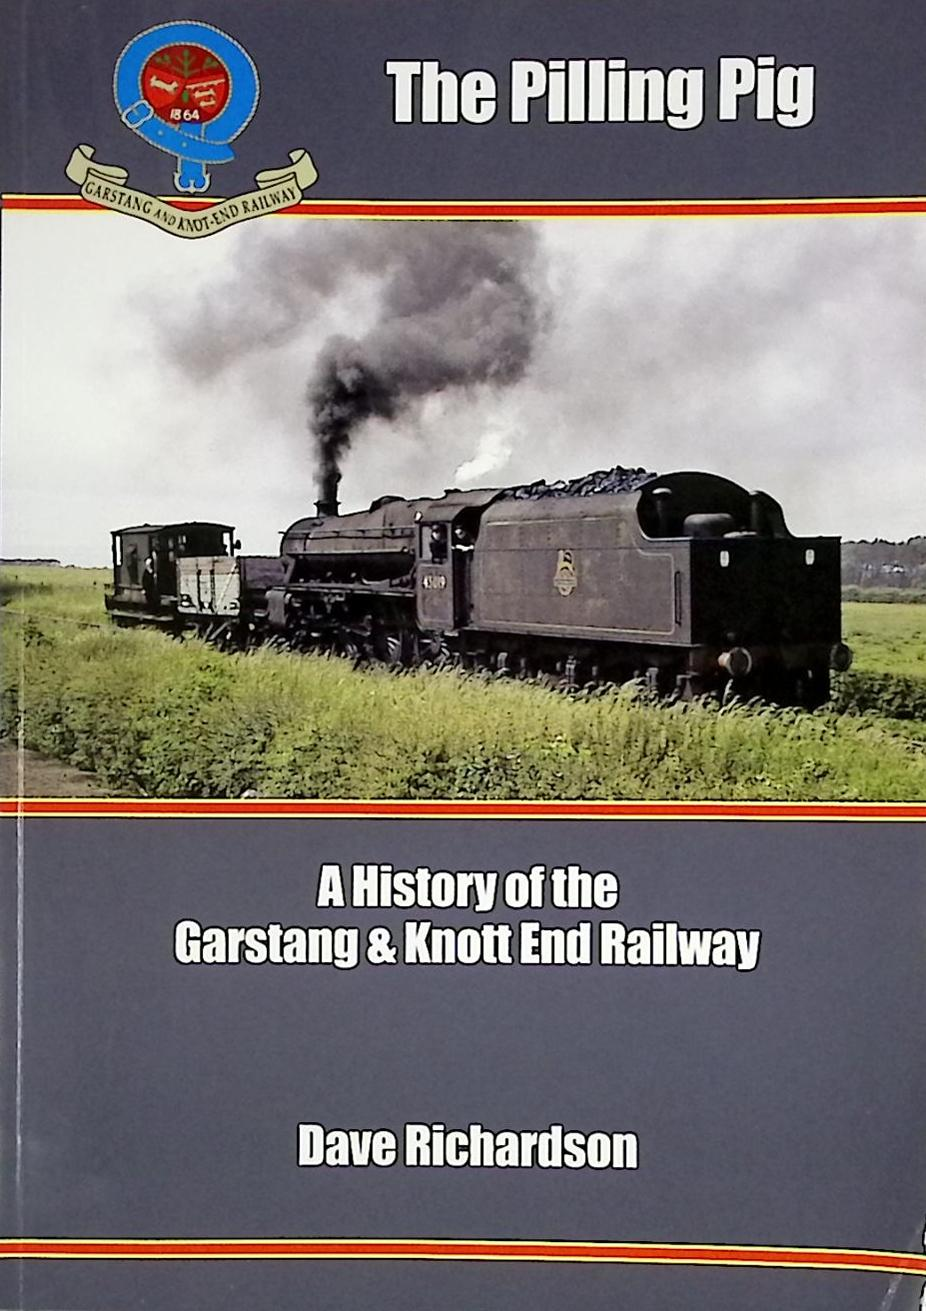 The Pilling Pig. A History of the Garstang & Knott End Railway.